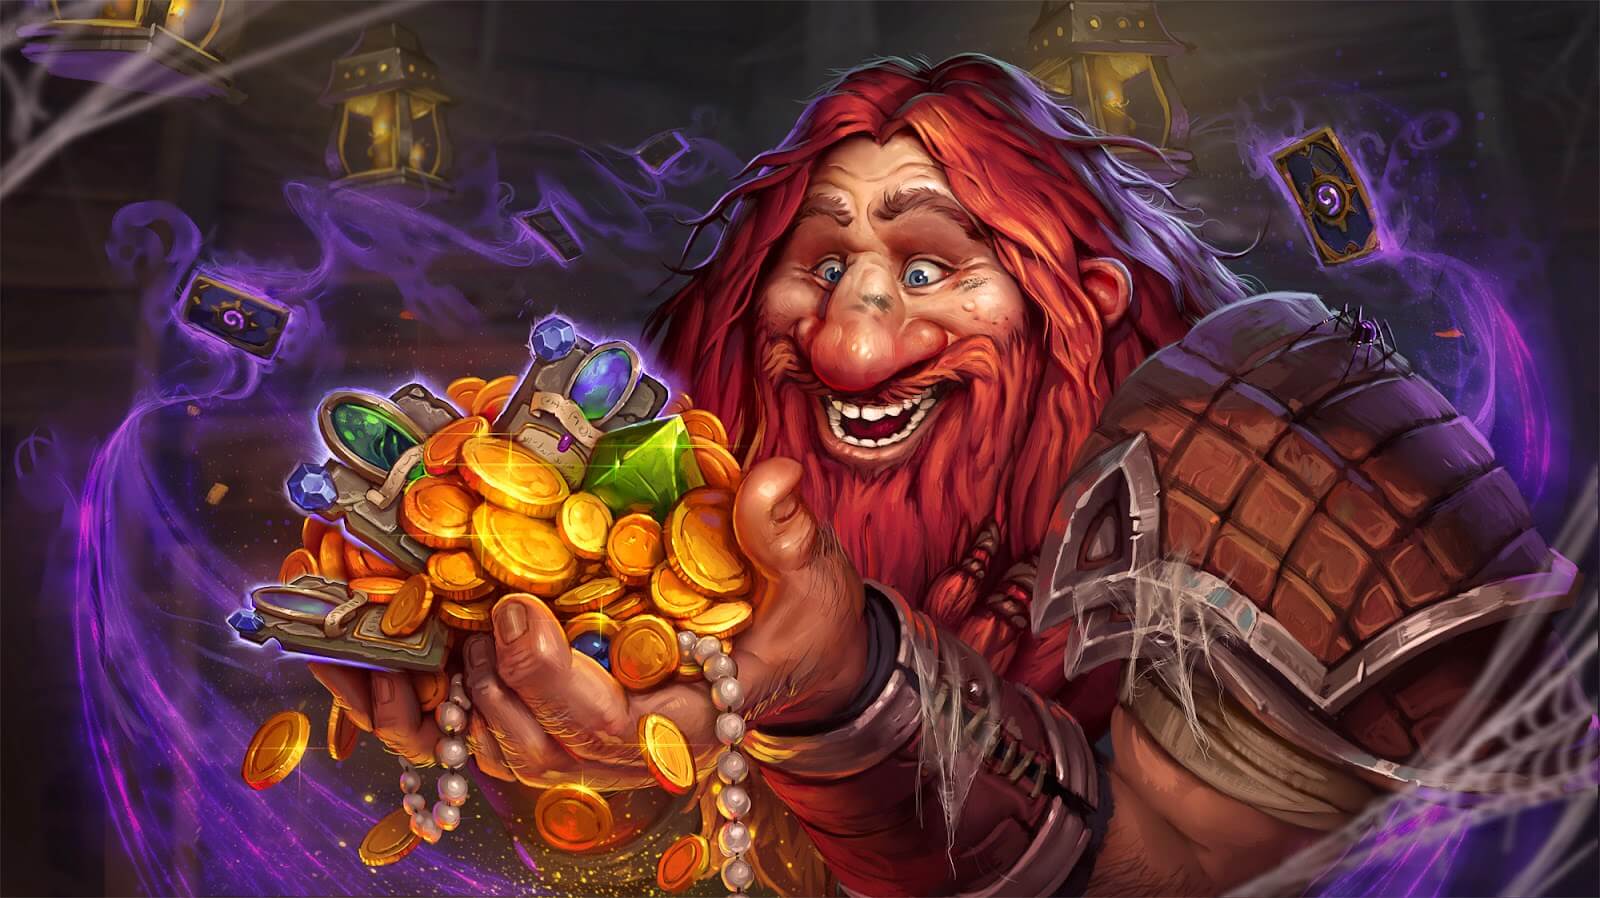 Hearthstone celebrates 70 million players with free card packs